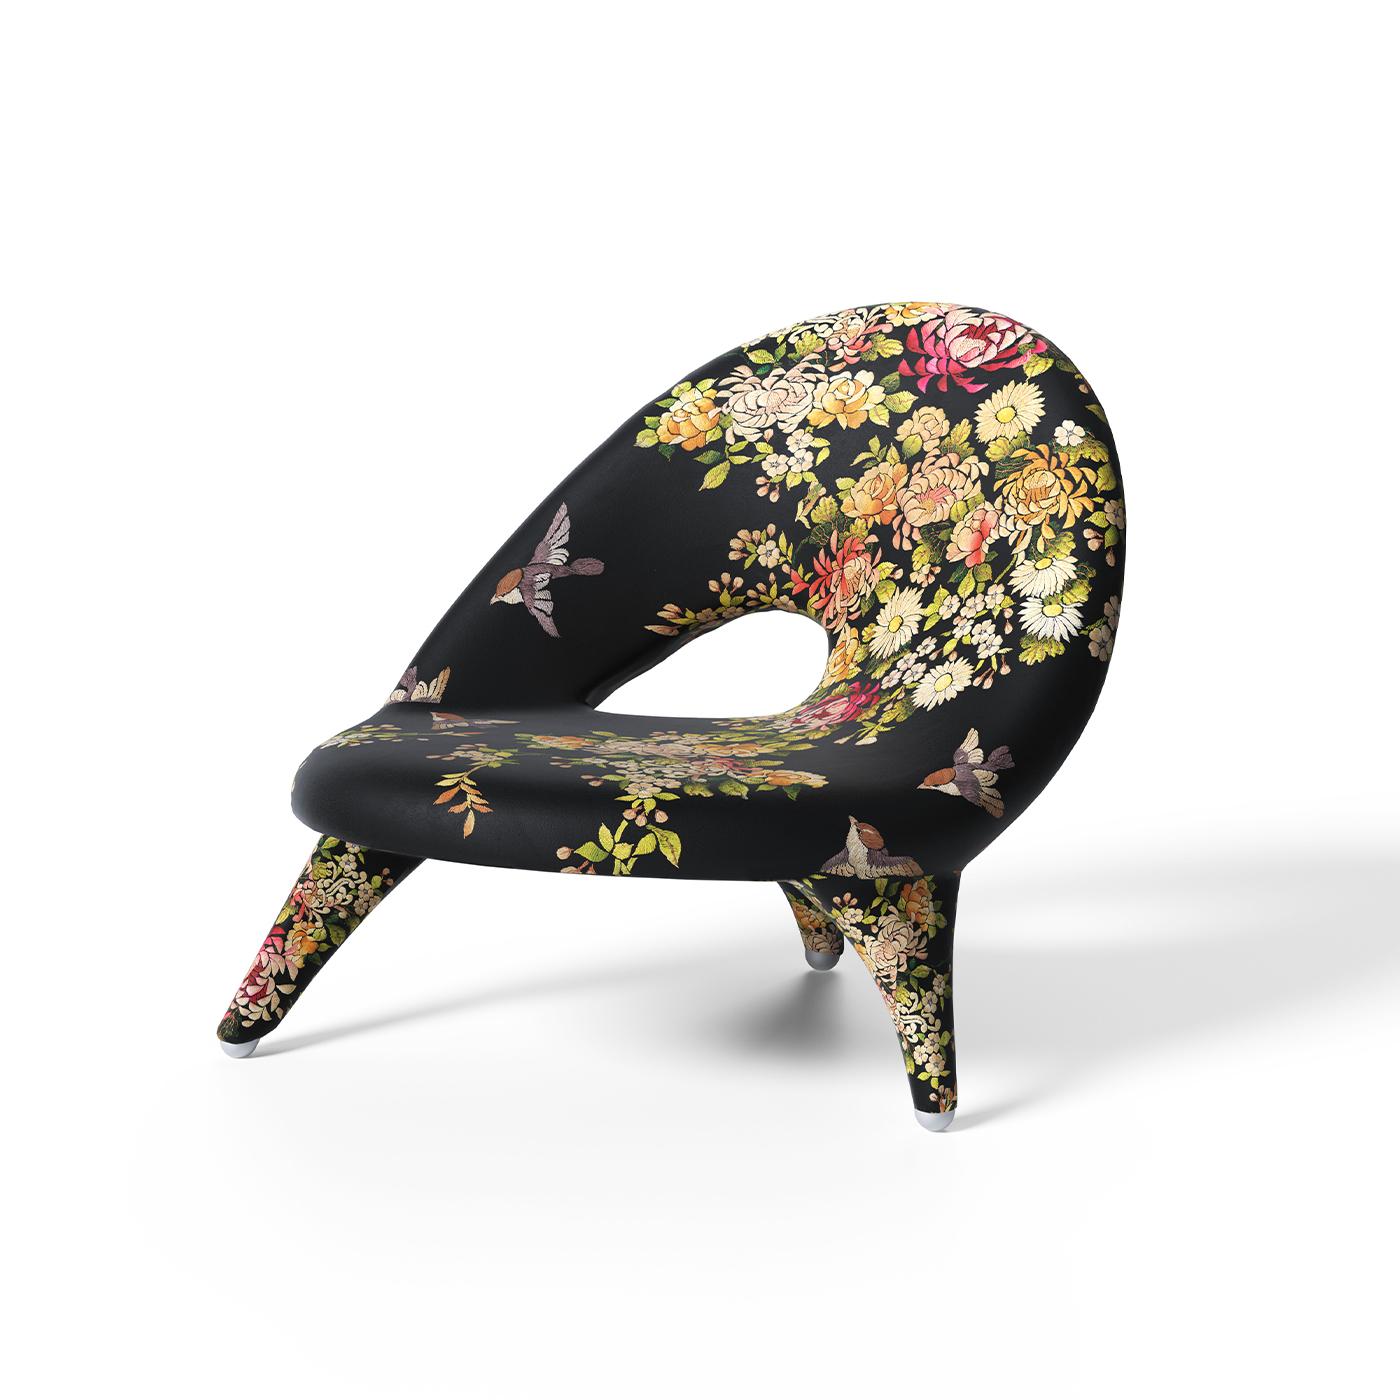 Three-legged armchair with structure in foam, upholstery in printed synthetic fabric “Tree of Life” by Simone Guidarelli on a black base. Silver lacquered-shaped wooden feet.